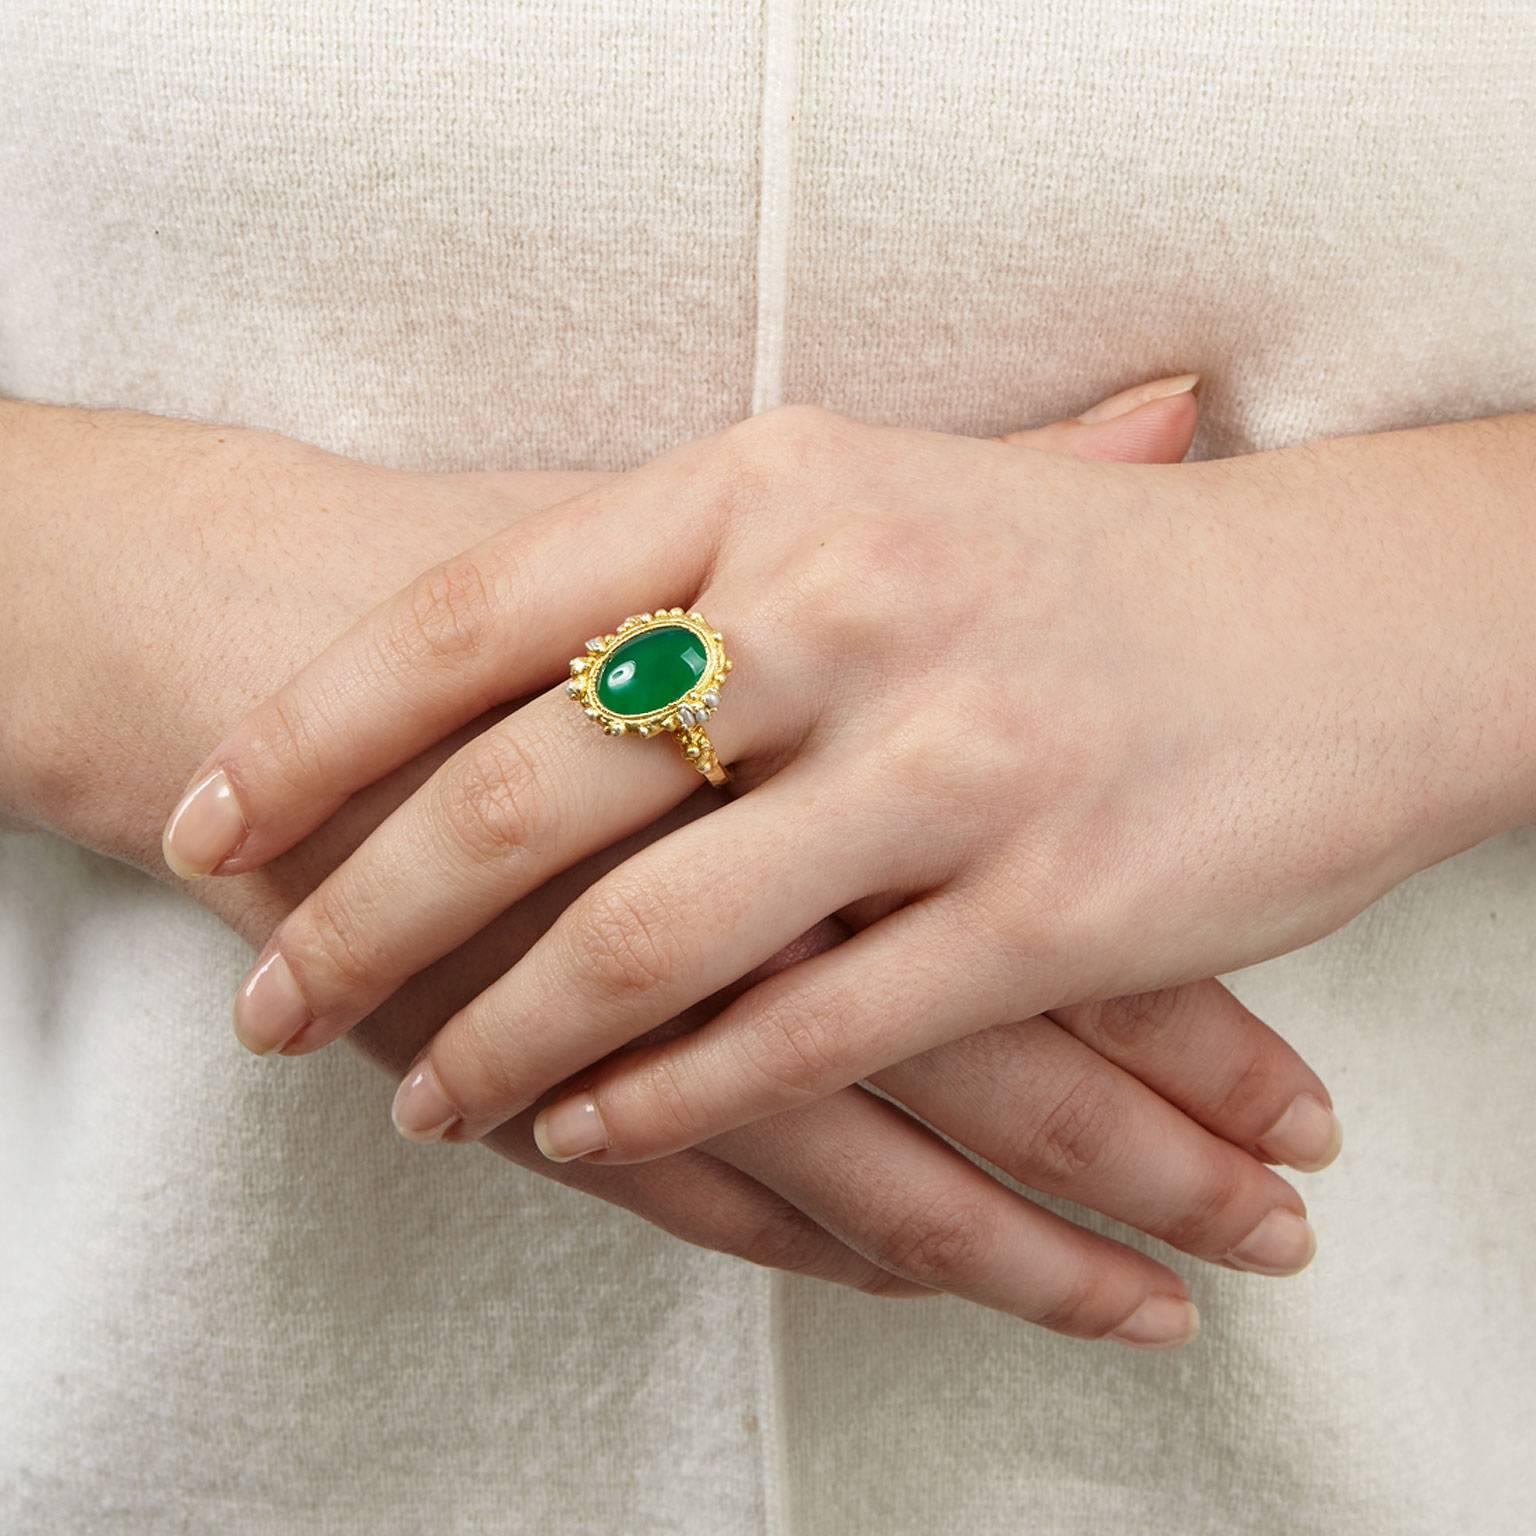 Be the envy of all your friends with the vivid Mayflower ring.
A forest-green agate stone sits at the centre, encrusted in golden granules and a scattering of seed pearls atop a hammered band. All in gold plated silver.
Bringing a touch of opulence